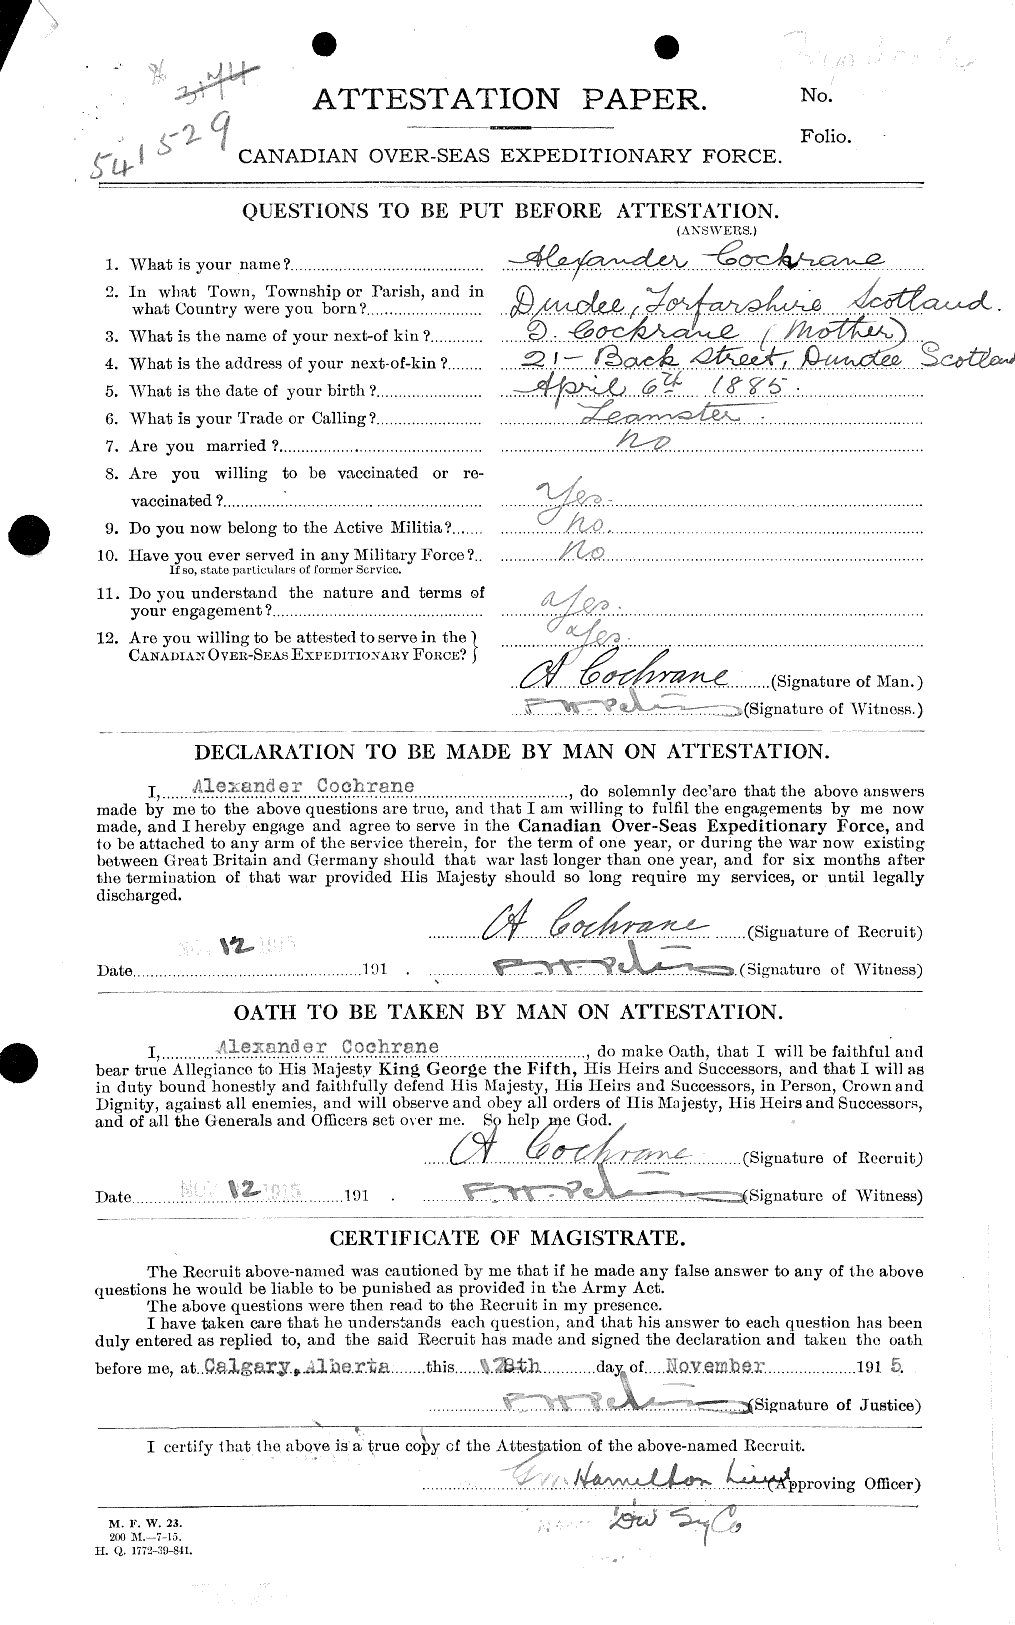 Personnel Records of the First World War - CEF 025821a